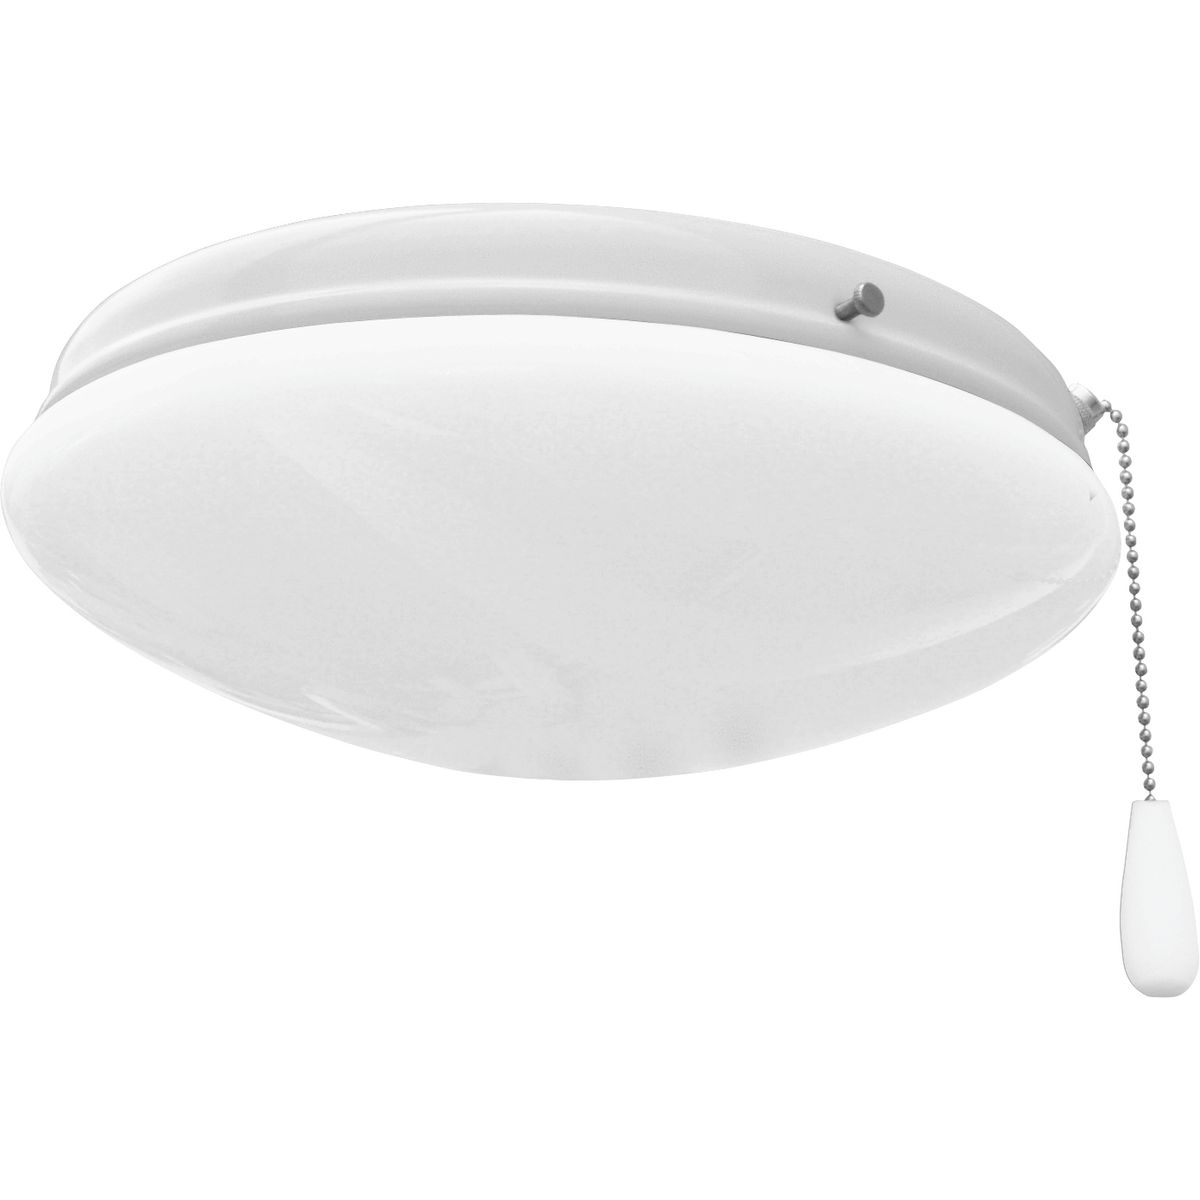 Two-light universal-style ceiling fan light kit features a low-profile, opal glass diffuser that's ideal for lighting in a bedroom. This fan light kit includes a threaded adapter for quick connection to most indoor ceiling fans that accept an accessory light. Includes two 3000K, 800 lumen each (source), Title 24 certified LED bulbs. White finish.